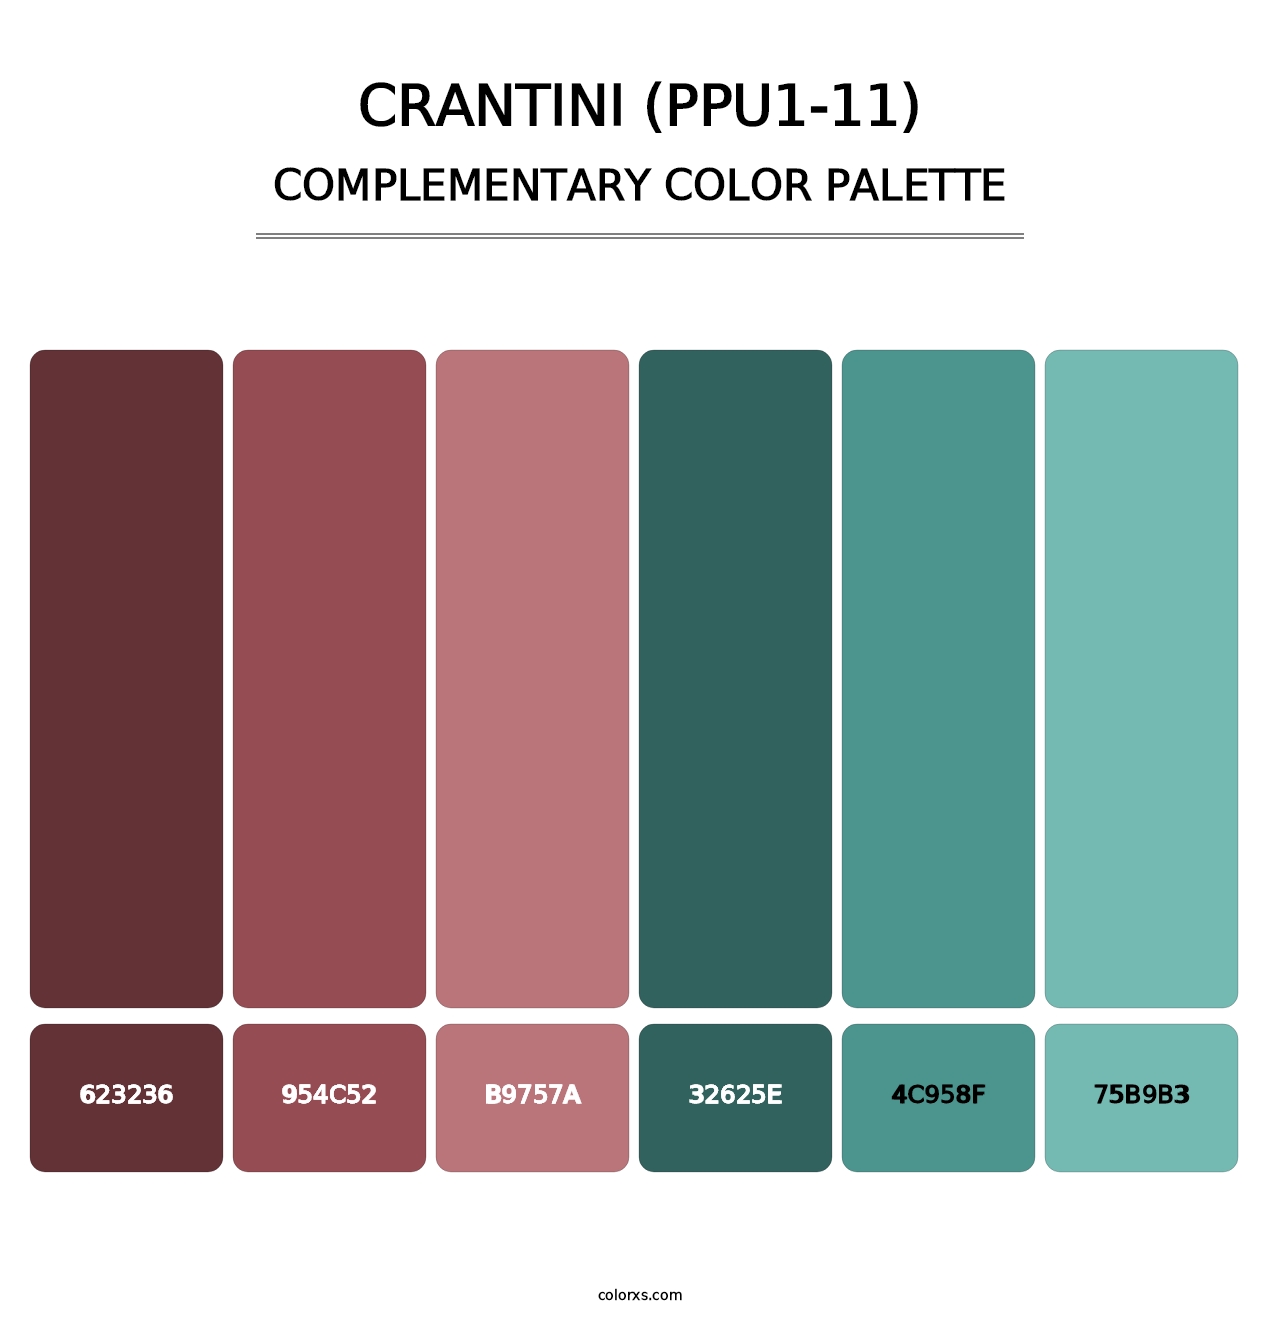 Crantini (PPU1-11) - Complementary Color Palette